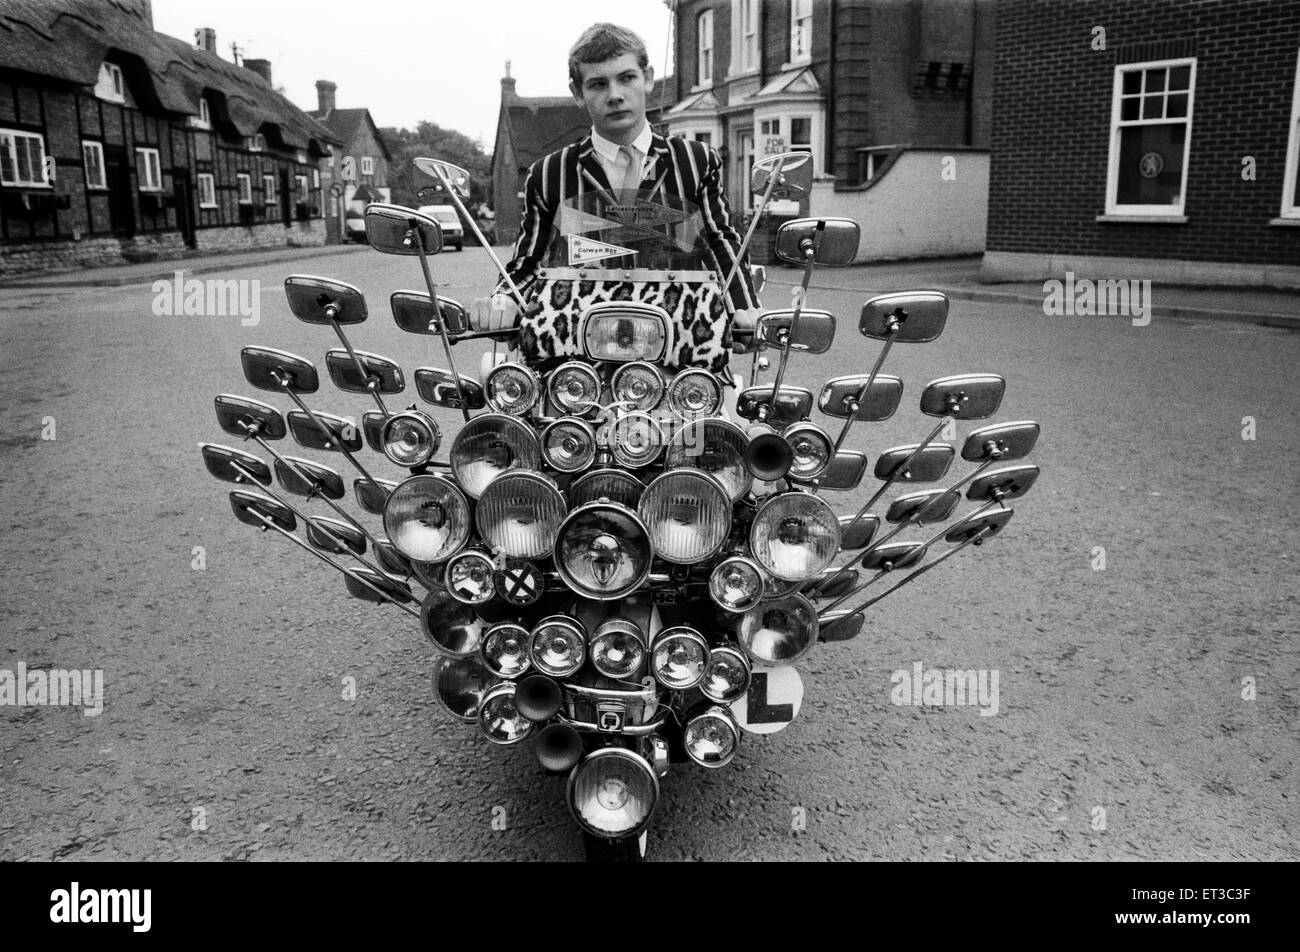 School leaver Bryn Owen aged 17 with his Vespa scooter, which has 34 mirrors and 81 lights on the front and back, all bought with his pocket money. Market Bosworth, Leicestershire, 1st July 1983. Stock Photo